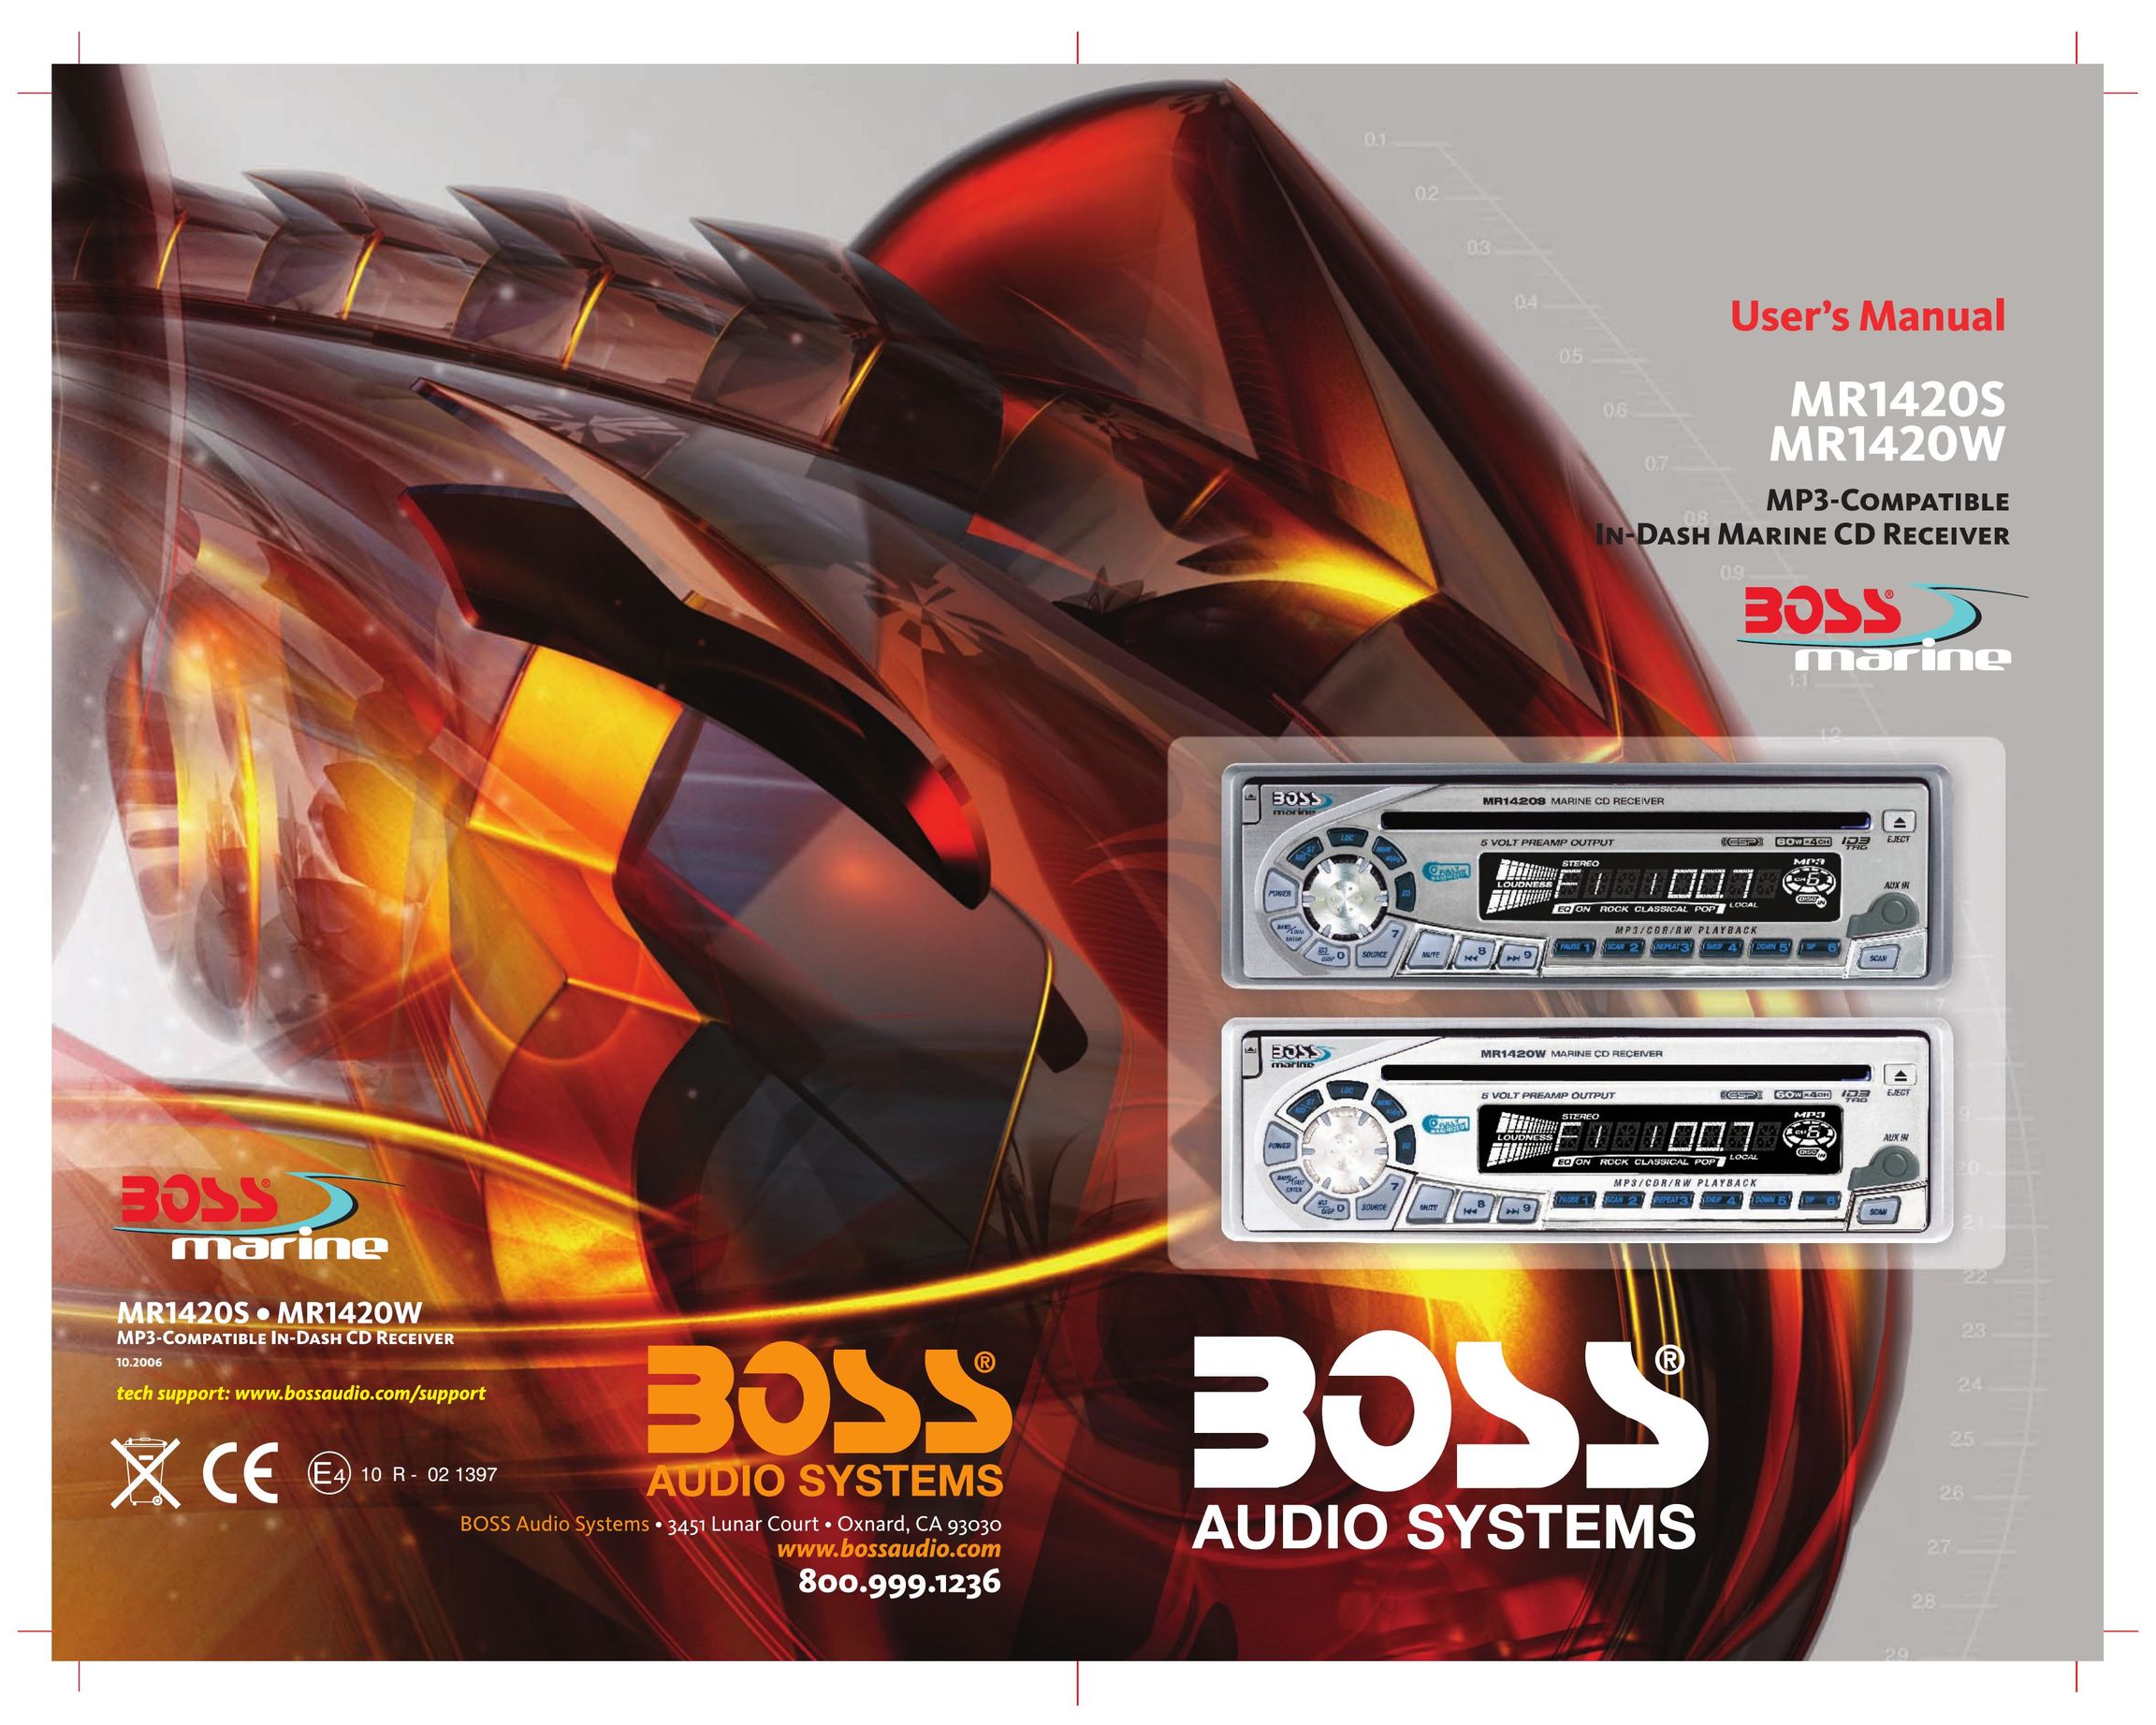 Boss Audio Systems MR1420W Carrying Case User Manual